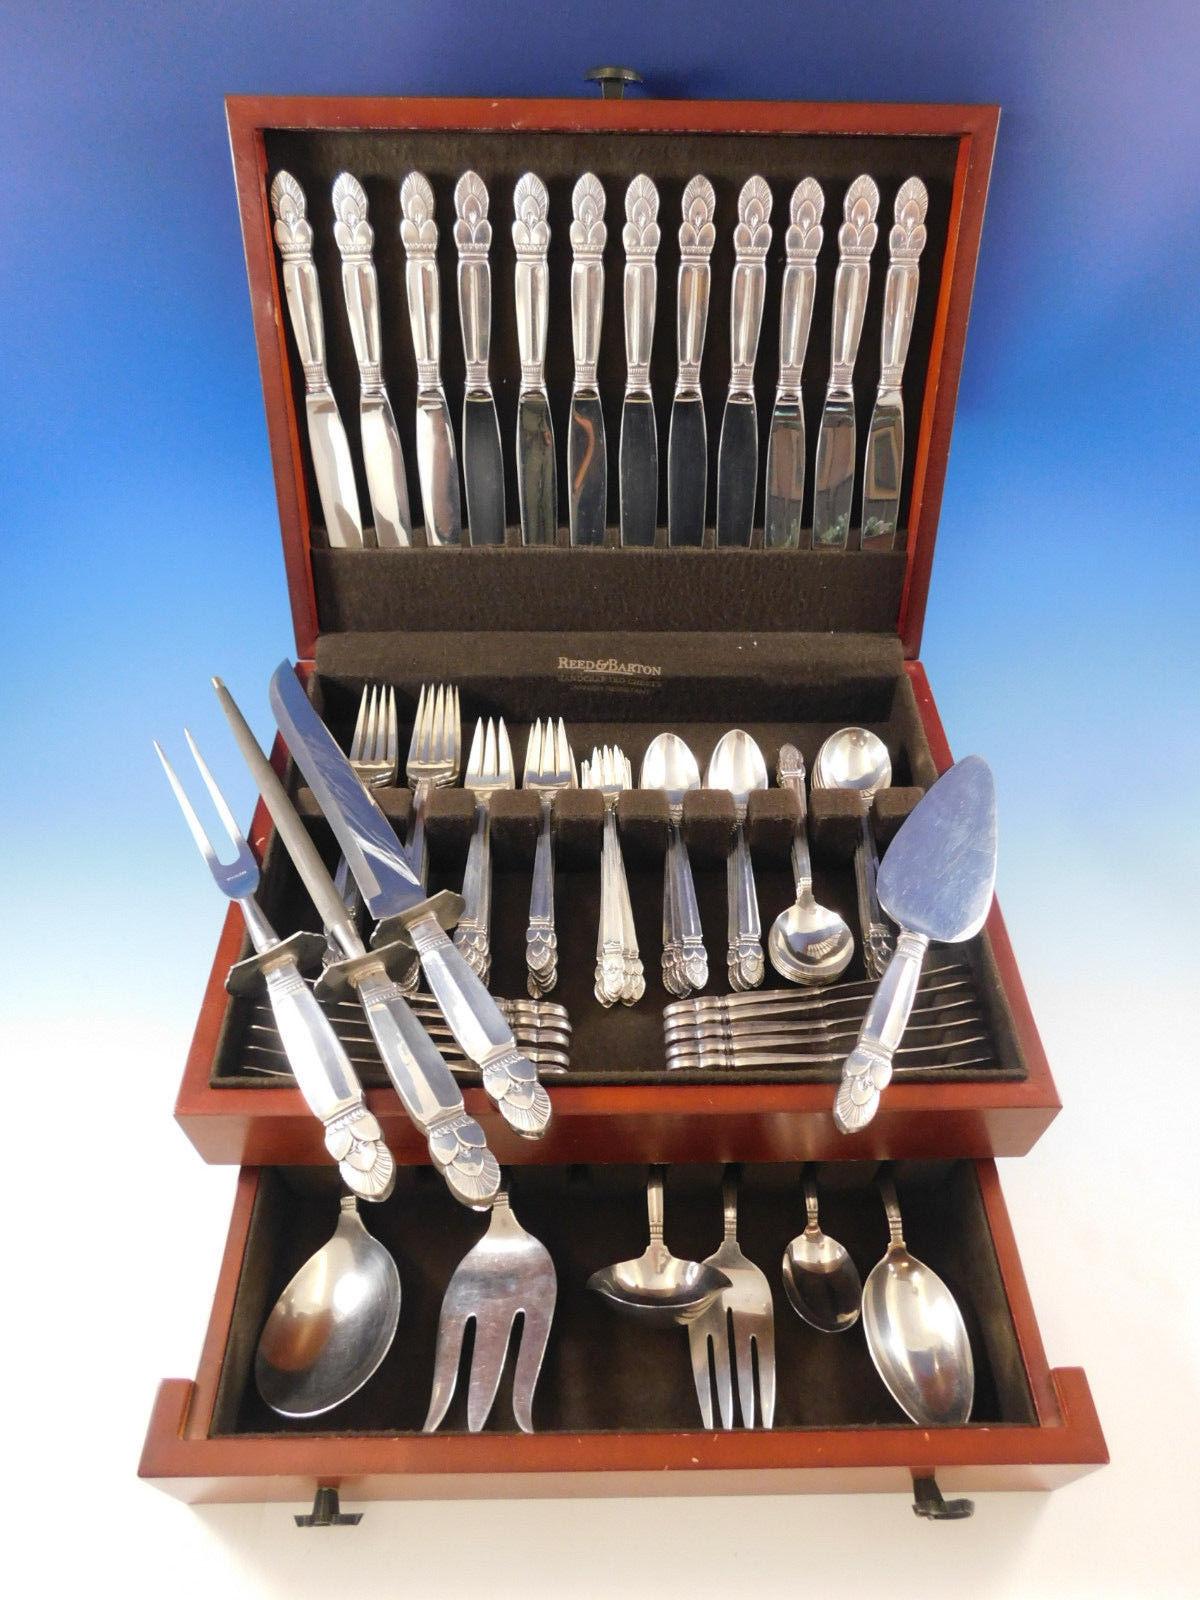 Dinner size princess Ingrid by Frank Whiting sterling silver flatware set - 94 pieces. This set includes:

12 dinner size knives, 9 3/4